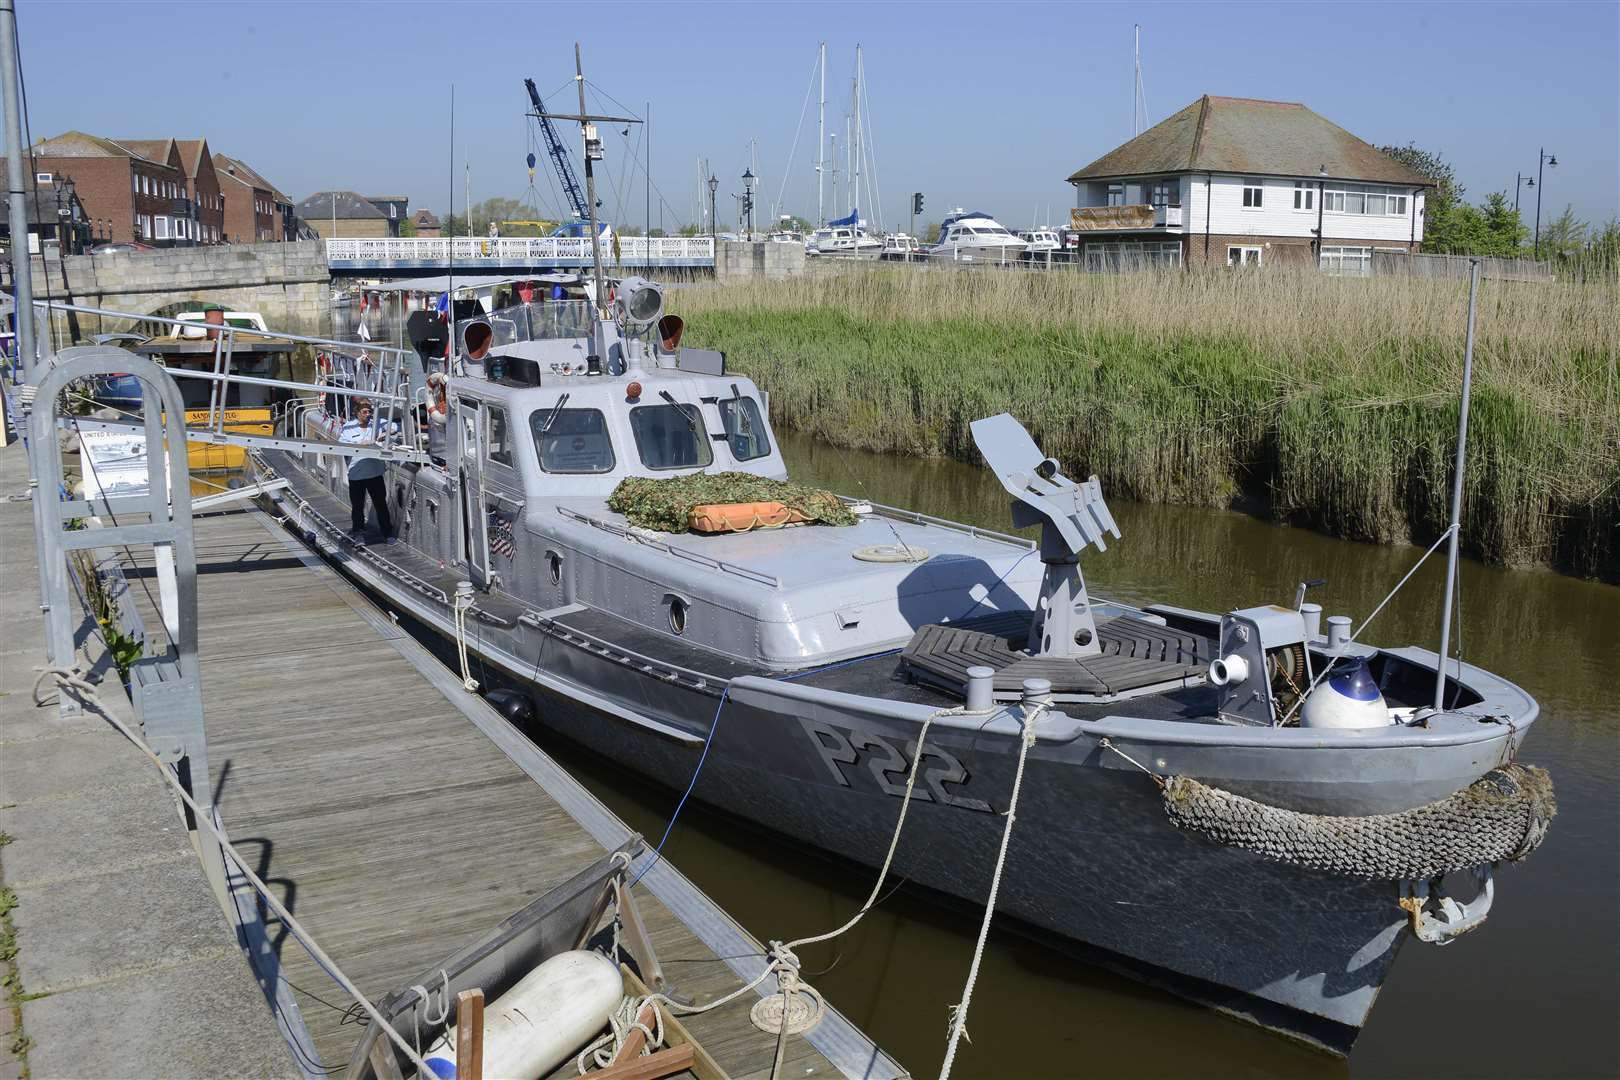 The American Cold War P22 Gun boat in the quay at Sandwich